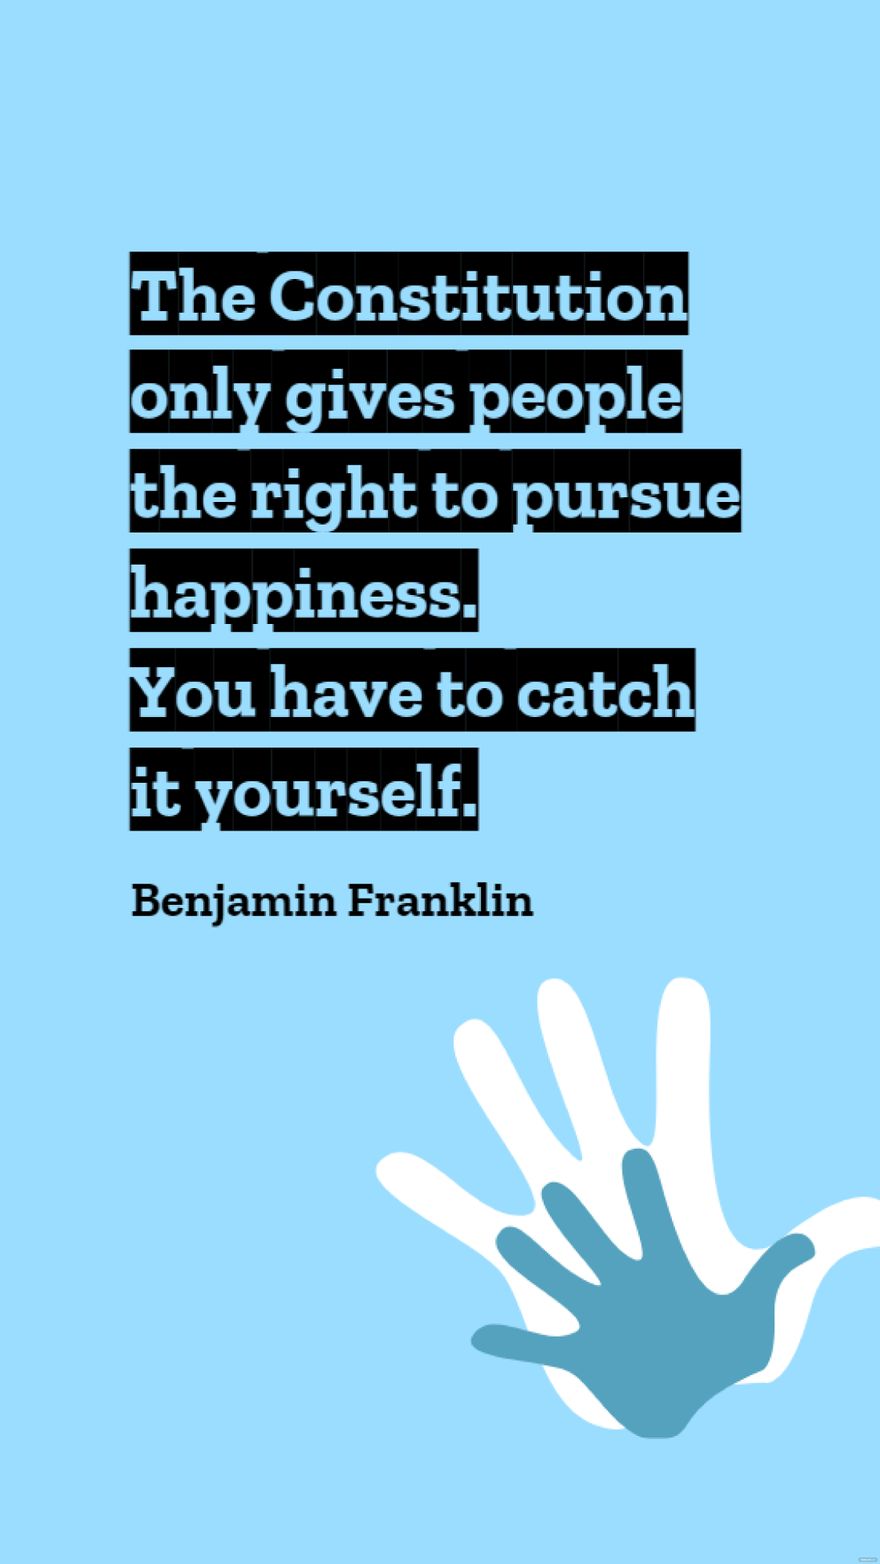 Benjamin Franklin - The Constitution only gives people the right to pursue happiness. You have to catch it yourself.